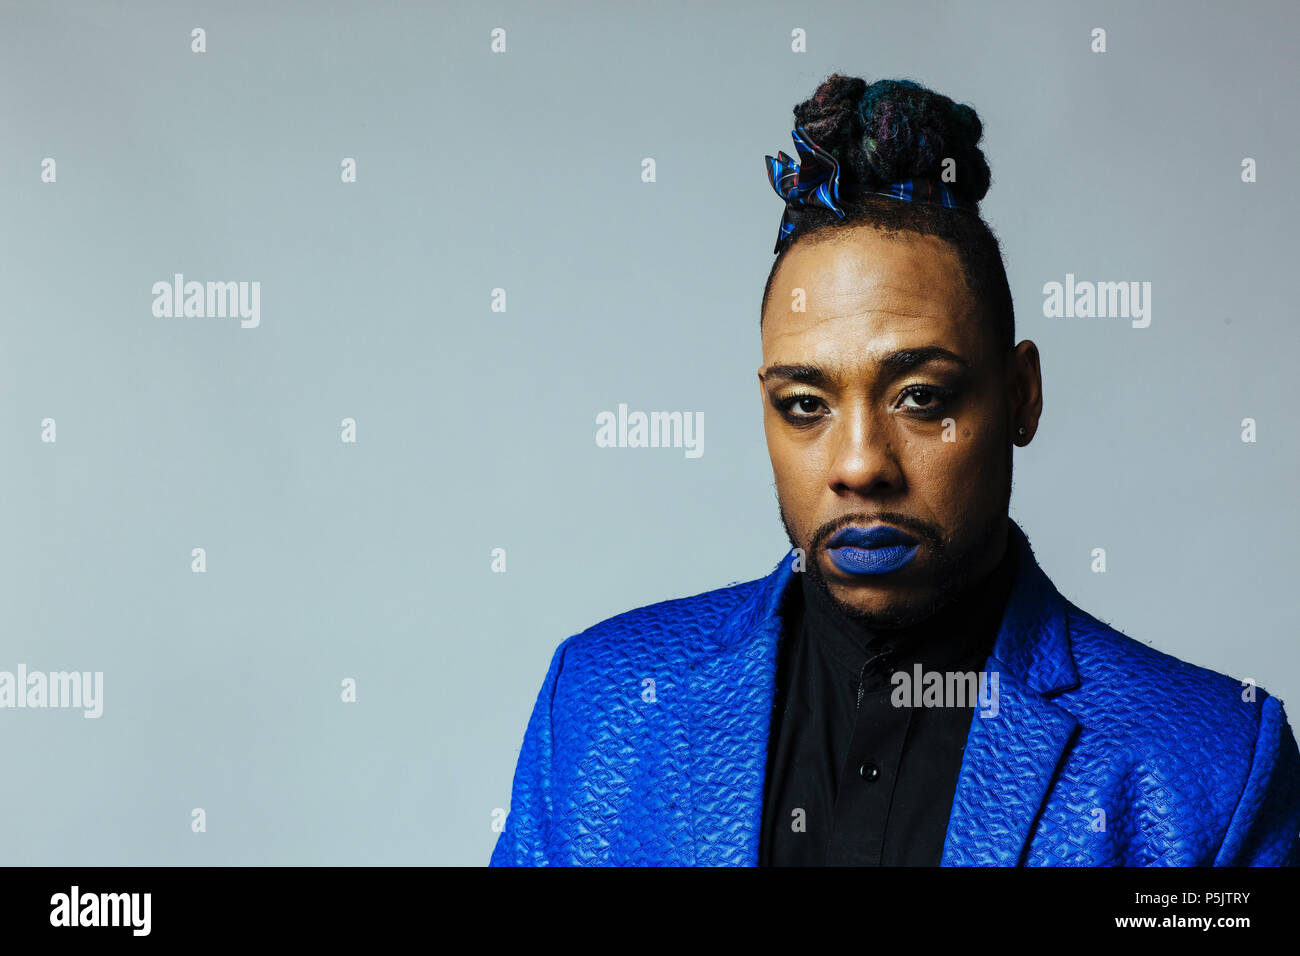 Portrait of a cool man in blue jacket and blue lips Stock Photo